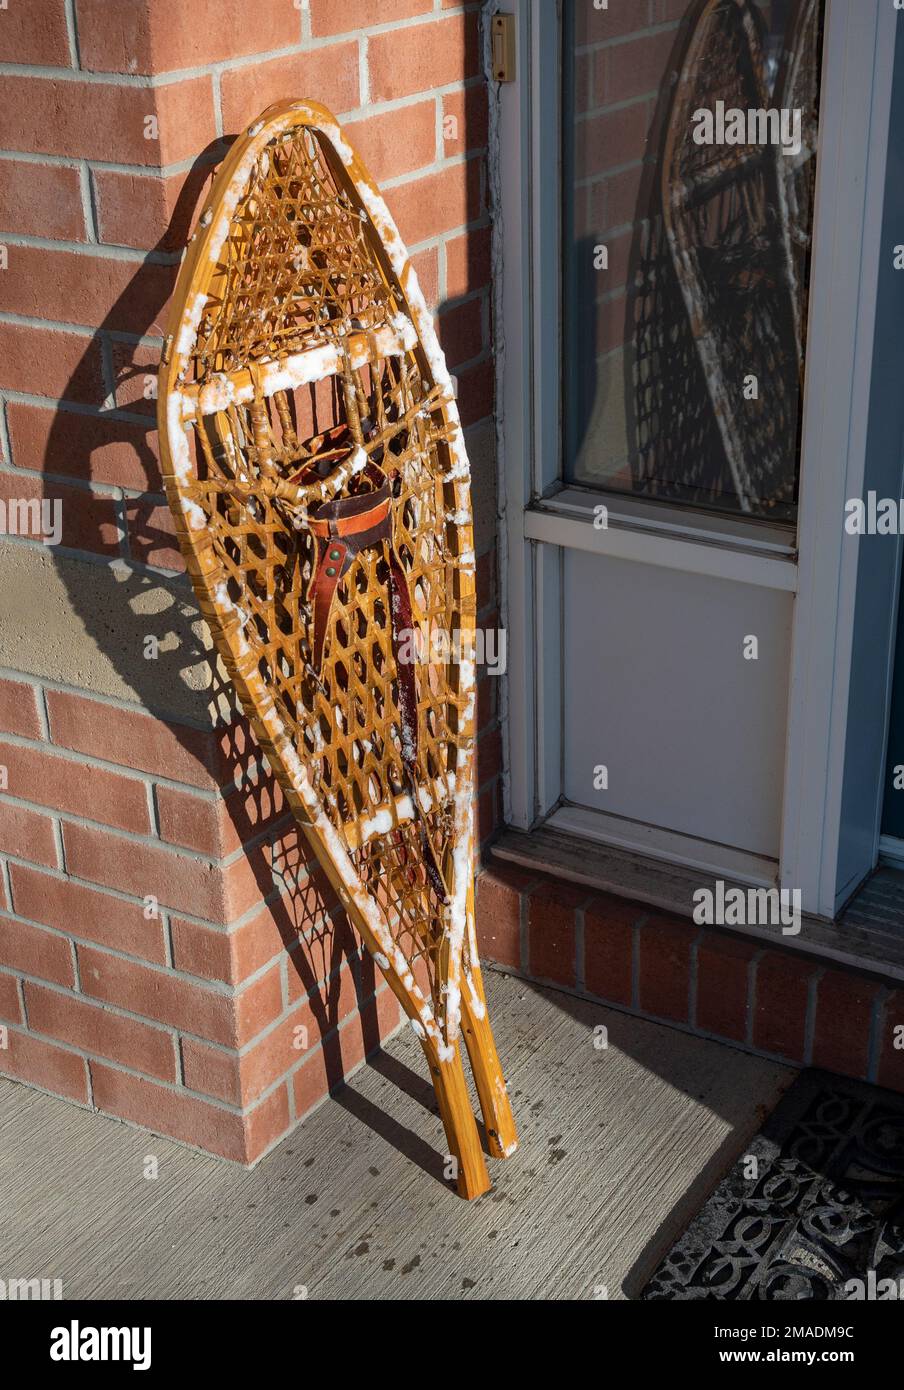 Snowshoes stacked by the front door: A pair of traditional snowshoes stacked in a sunny spot by the front door of a house.  The shoes are still covered with snow. Stock Photo